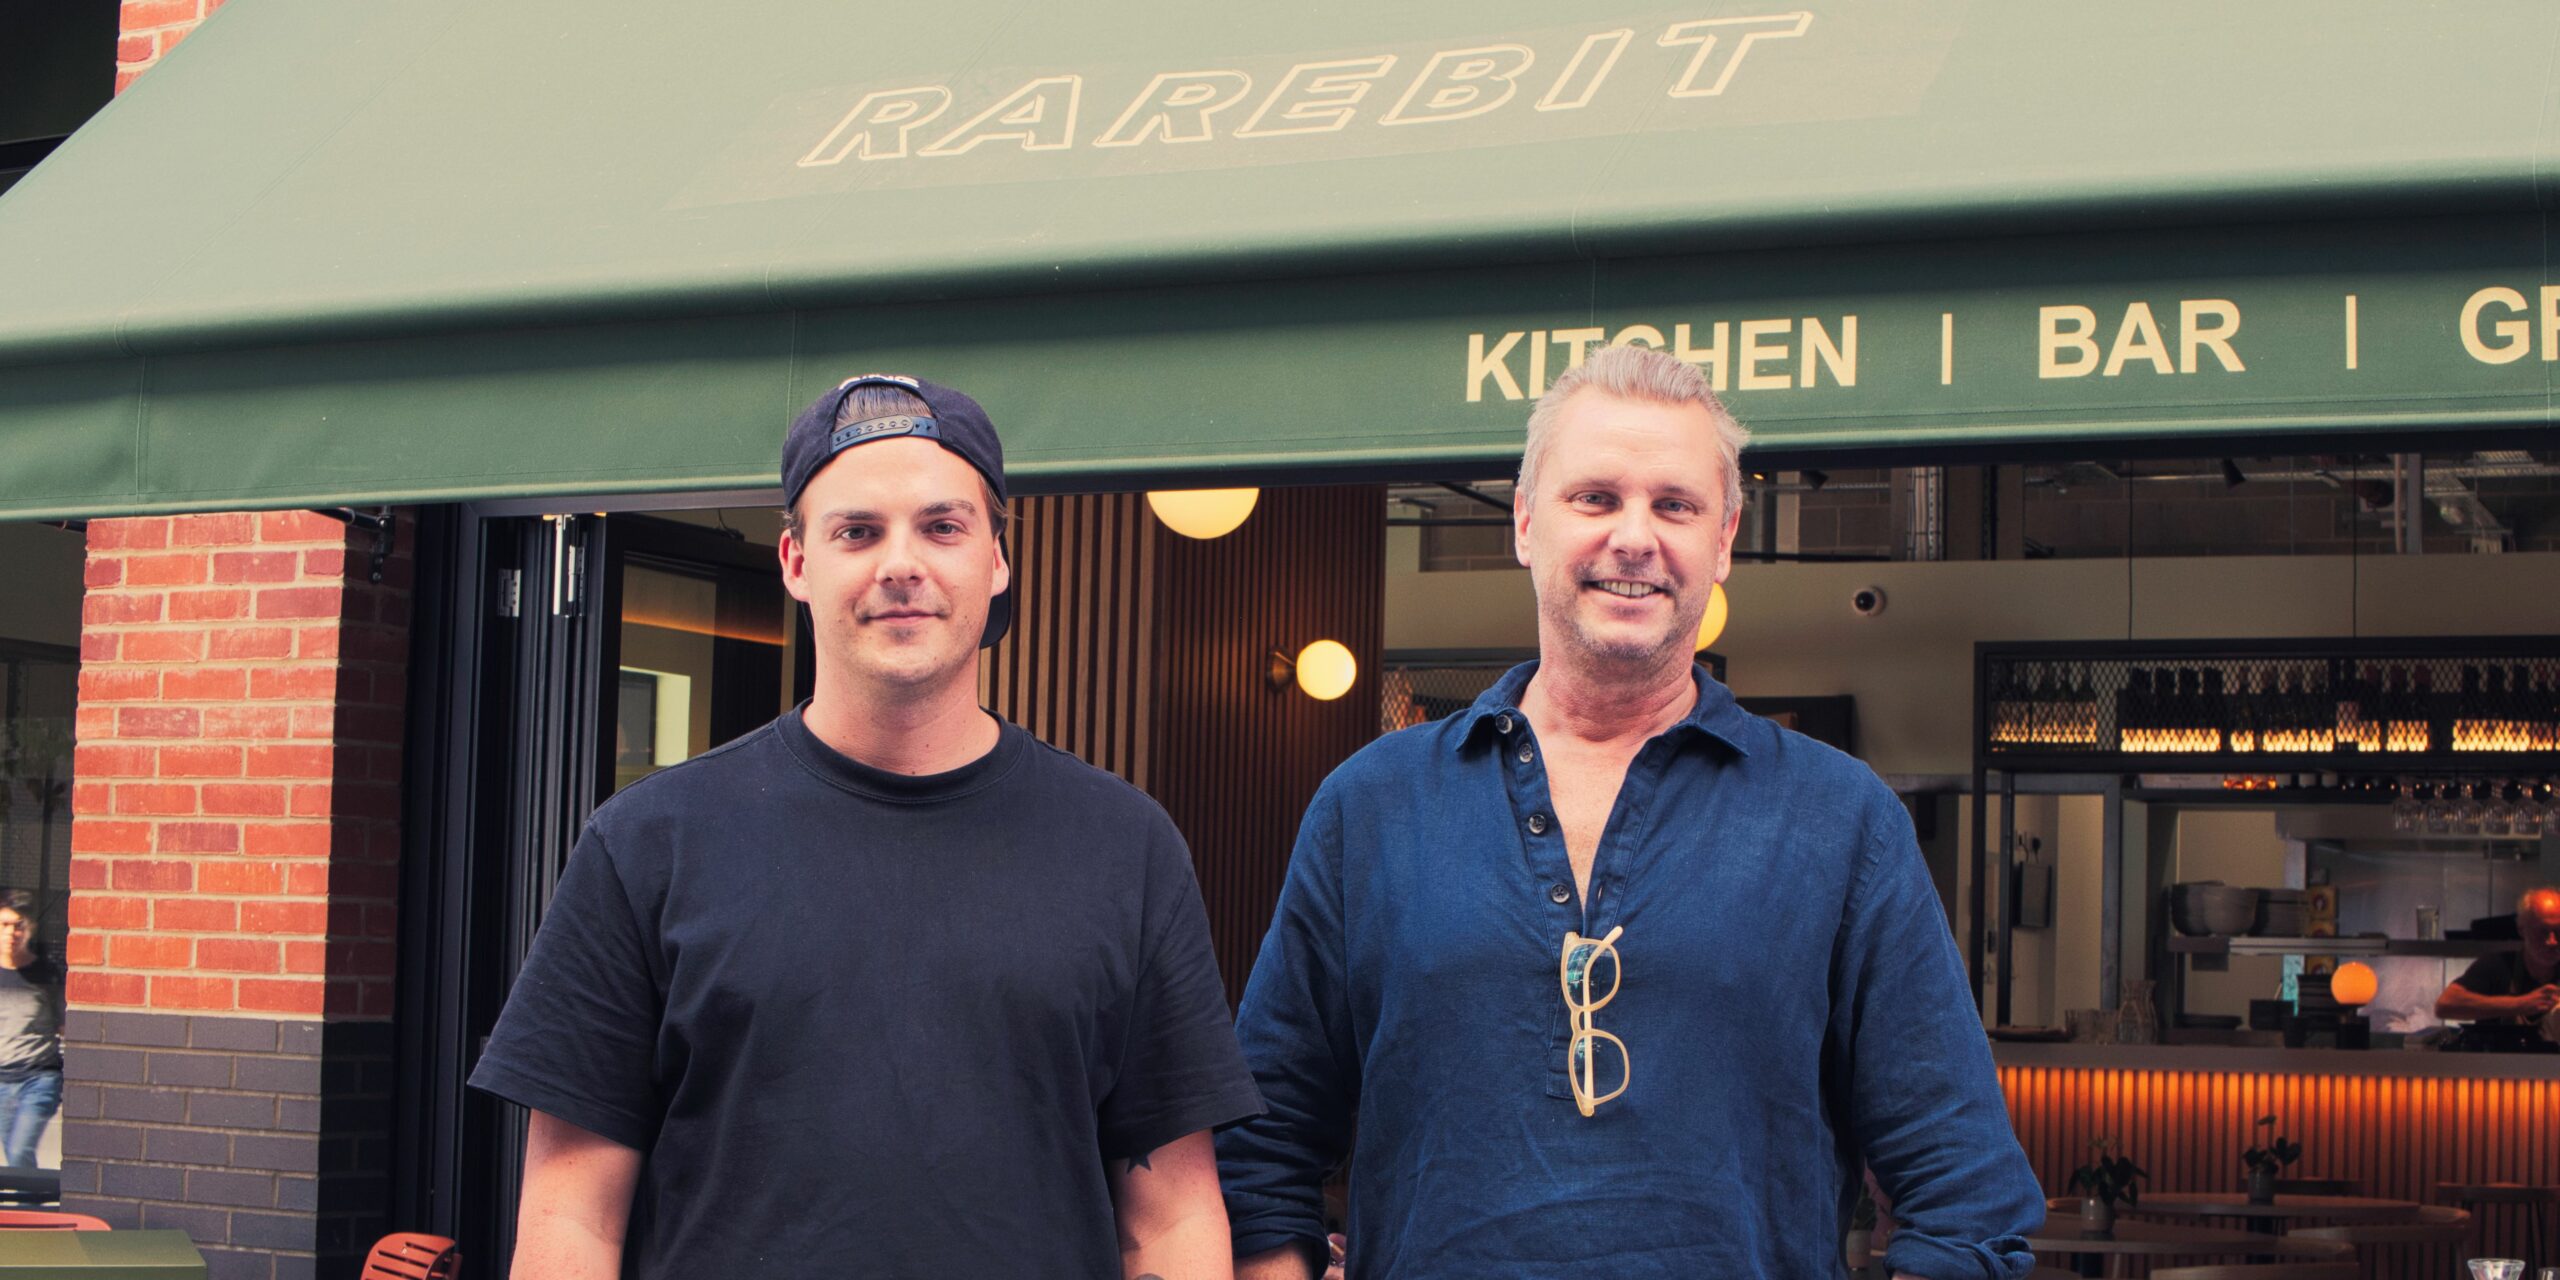 Mark and Will, co-founders of rarebit